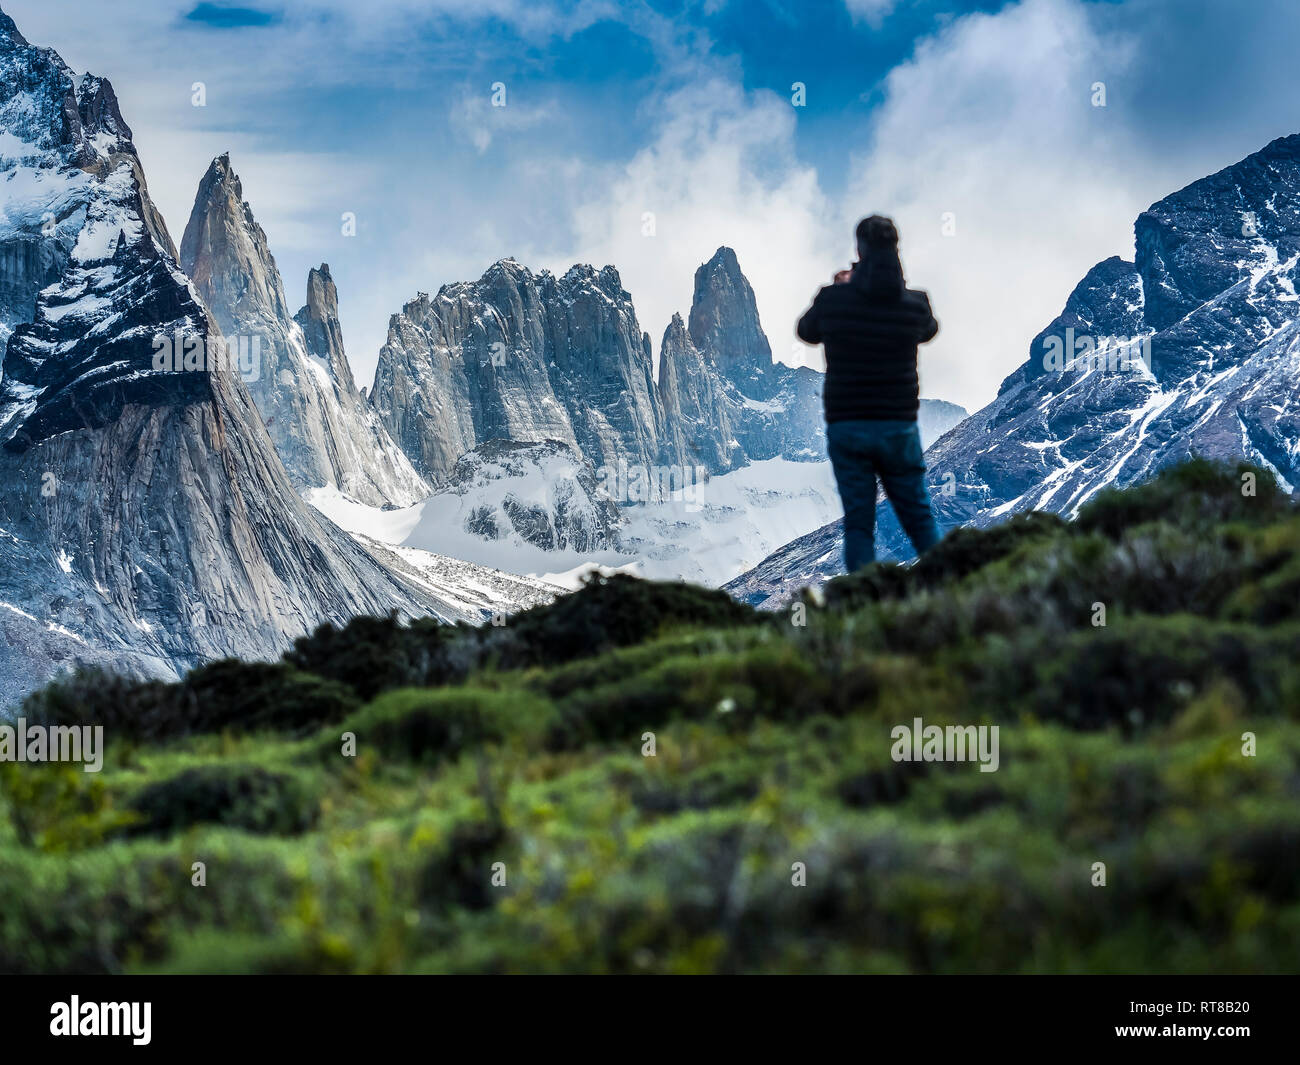 Chile, Patagonia, Torres del Paine National Park, Cerro Paine Grande and  Torres del Paine, tourist photographing, rear view Stock Photo